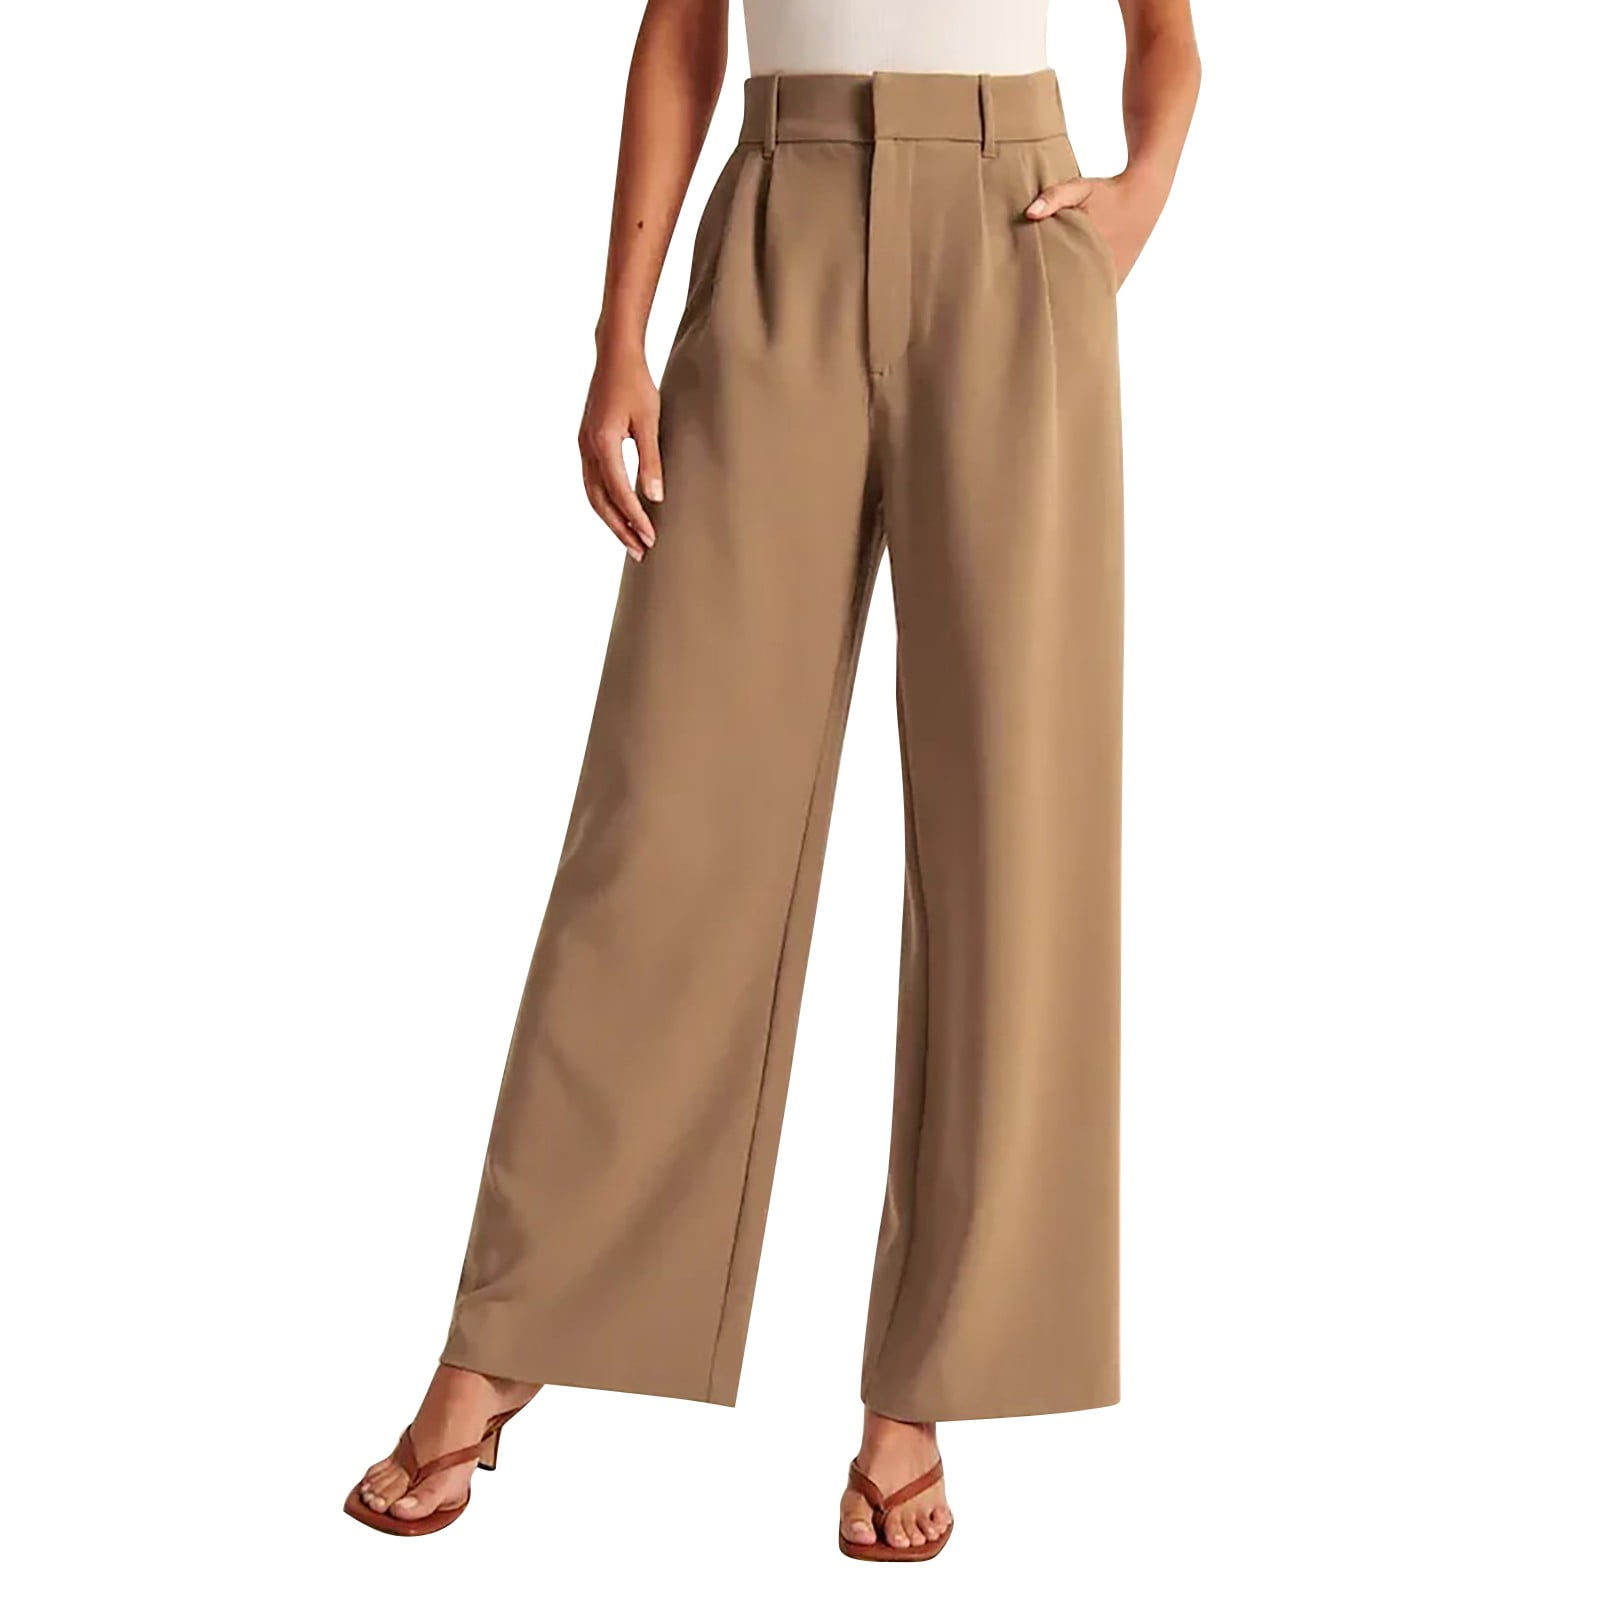 Daznico Women's Casual Solid Wide Leg Dress Pants High Waist Tailored  Button Down Trousers With Pockets Pants for Women Khaki XL